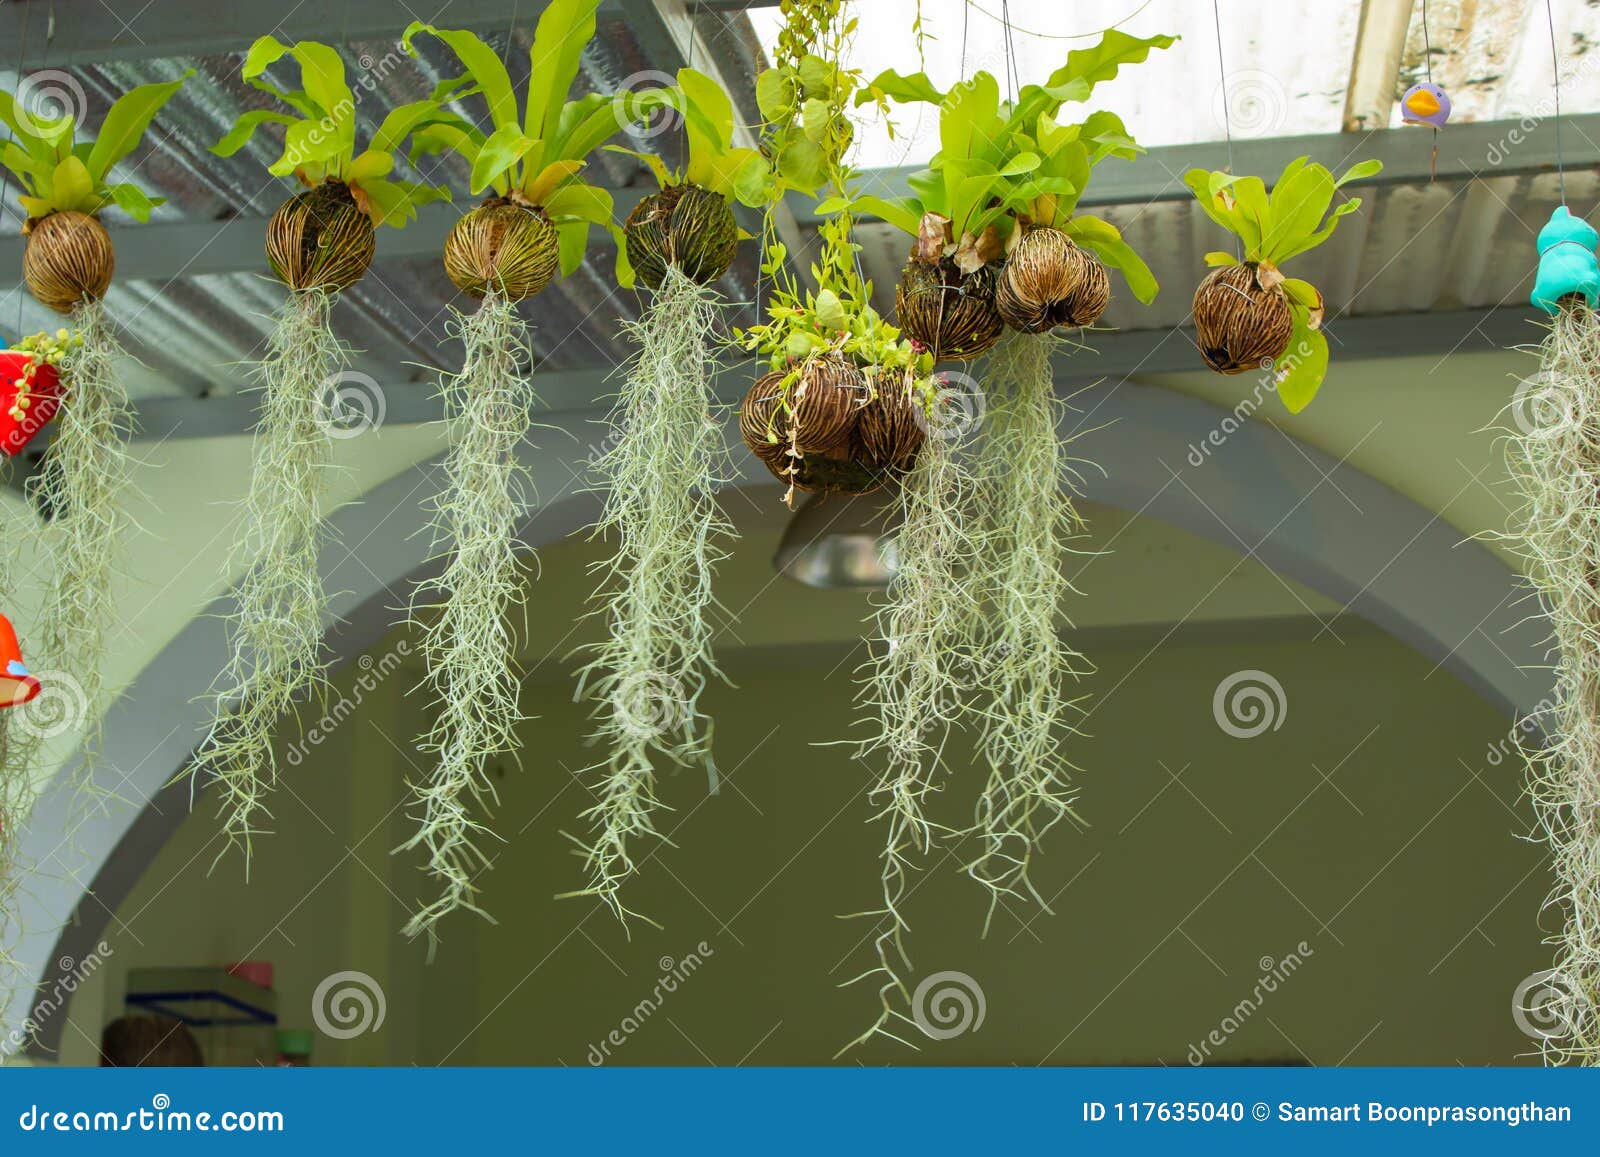 Tillandsia Usneoides Or Spanish Moss. Royalty-Free Stock Photography ...